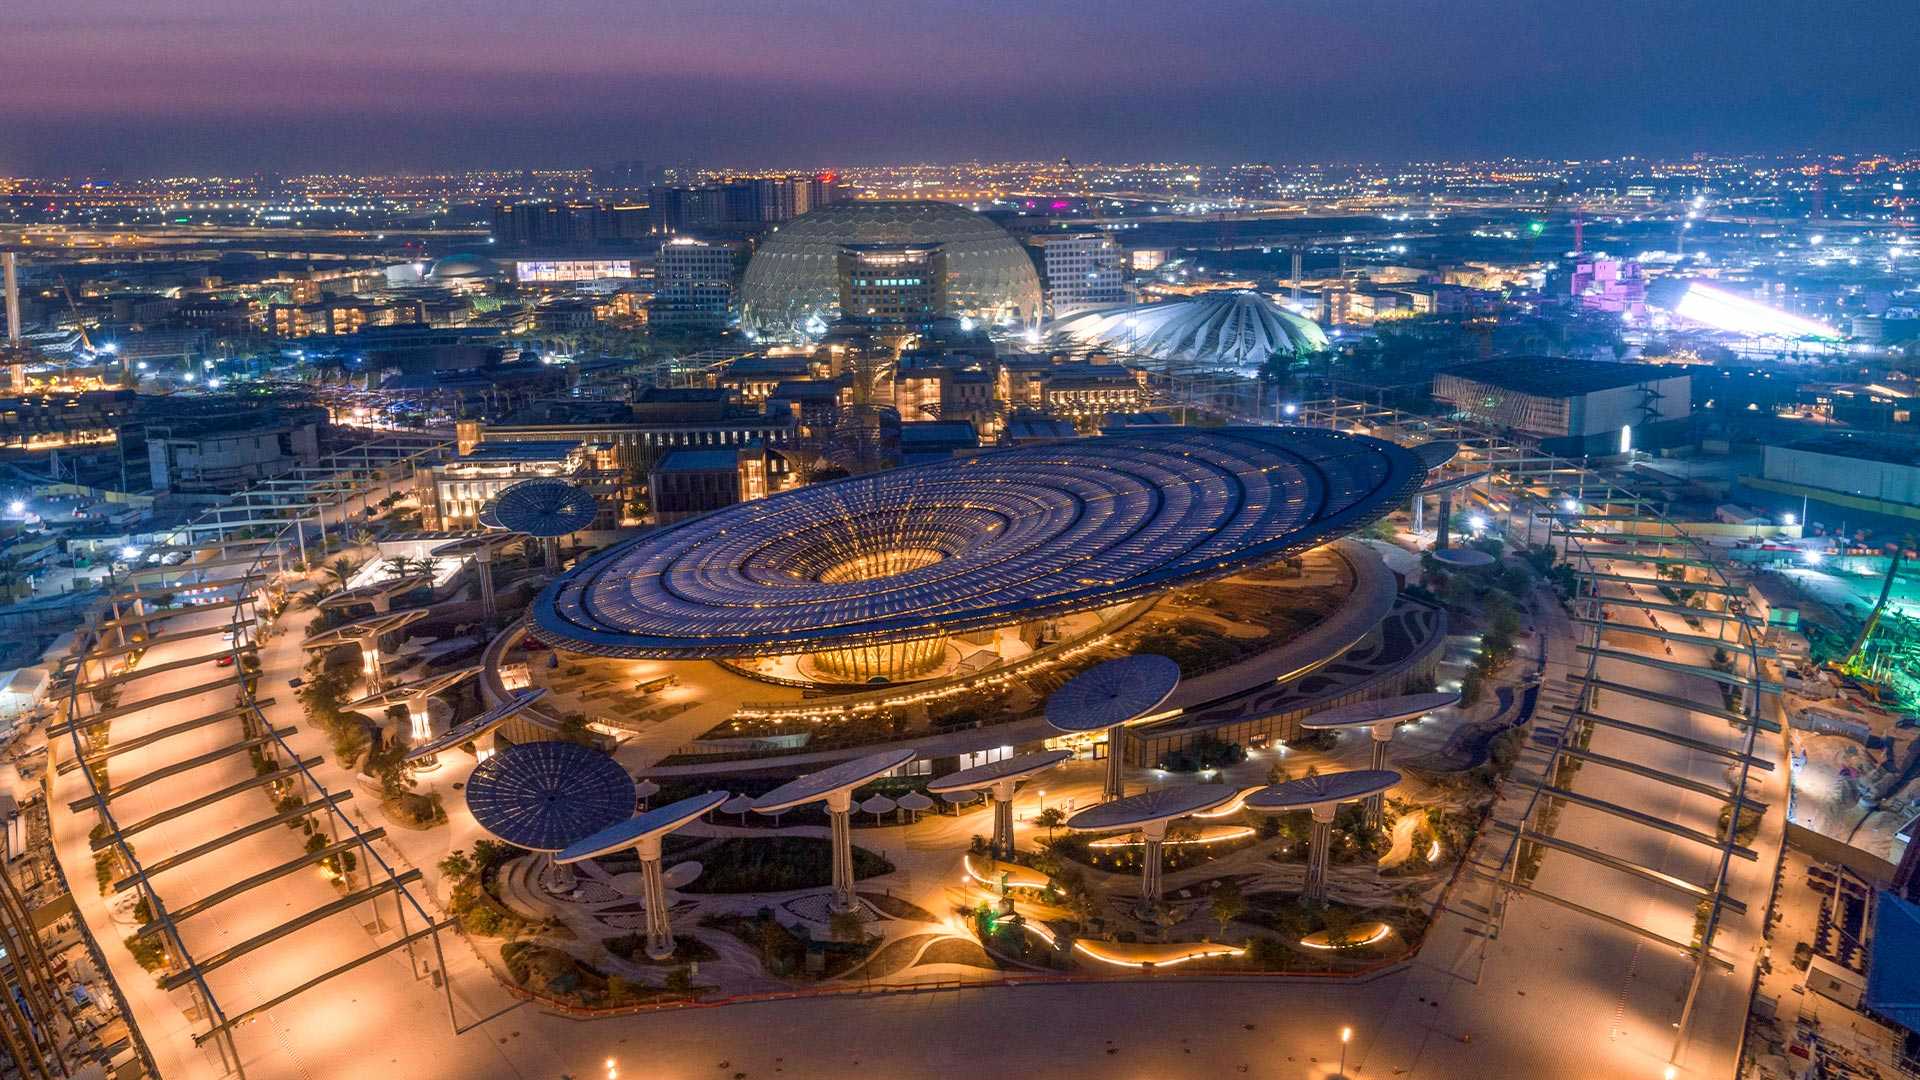 100 days to go until Expo 2020 Dubai: Sheikh Mohammed launches countdown